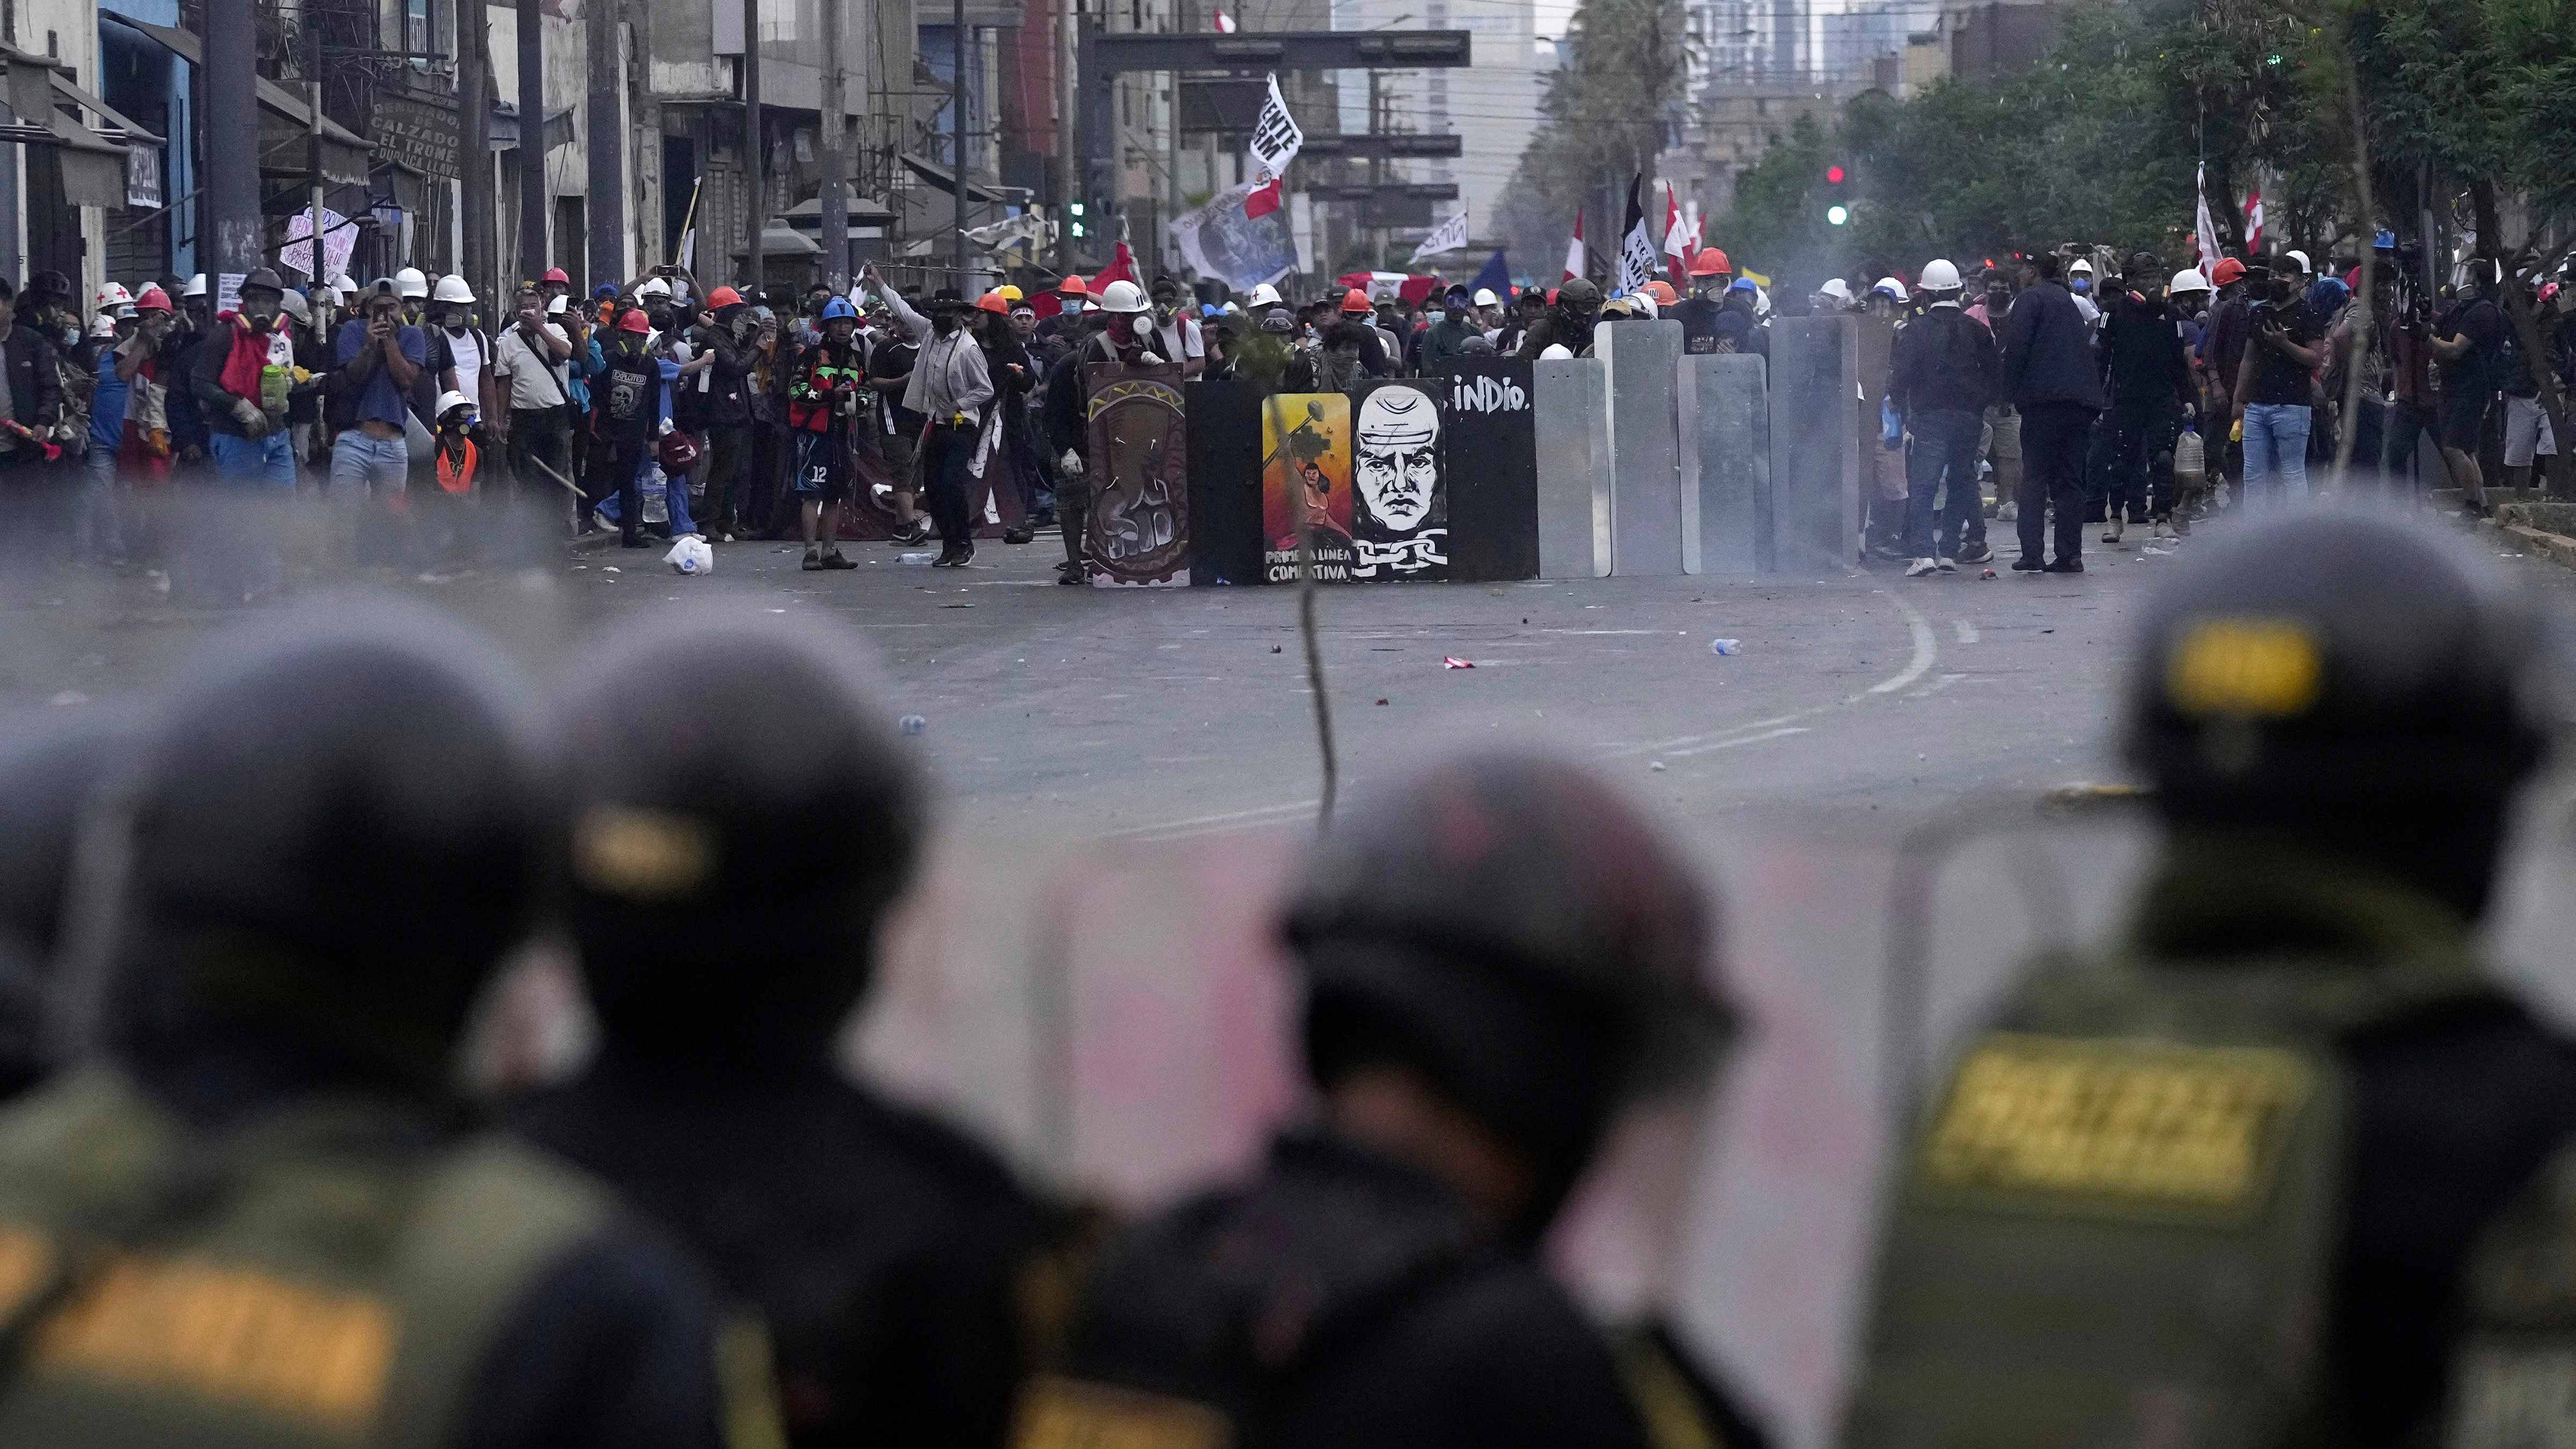 A total of 58 people, including one police officer, have now died amid the unrest across Peru that began after then-President Pedro Castillo was impeached and later arrested for trying to dissolve Congress on Dec. 7. Boluarte, who was then vice president, took over. Credit: AP Photo